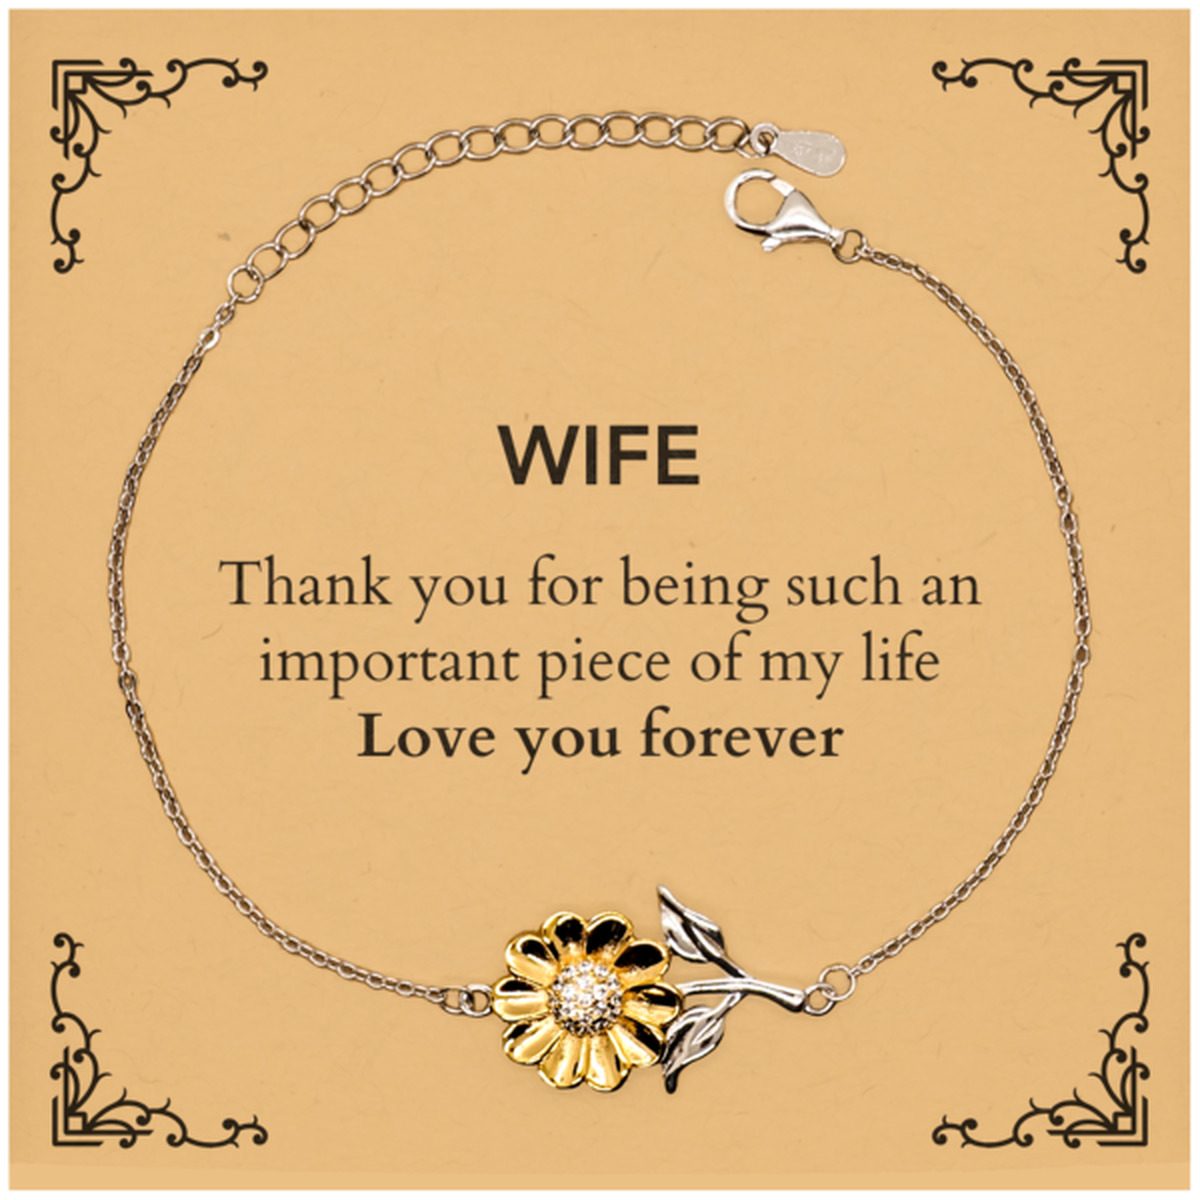 Appropriate Wife Sunflower Bracelet Epic Birthday Gifts for Wife Thank you for being such an important piece of my life Wife Christmas Mothers Fathers Day